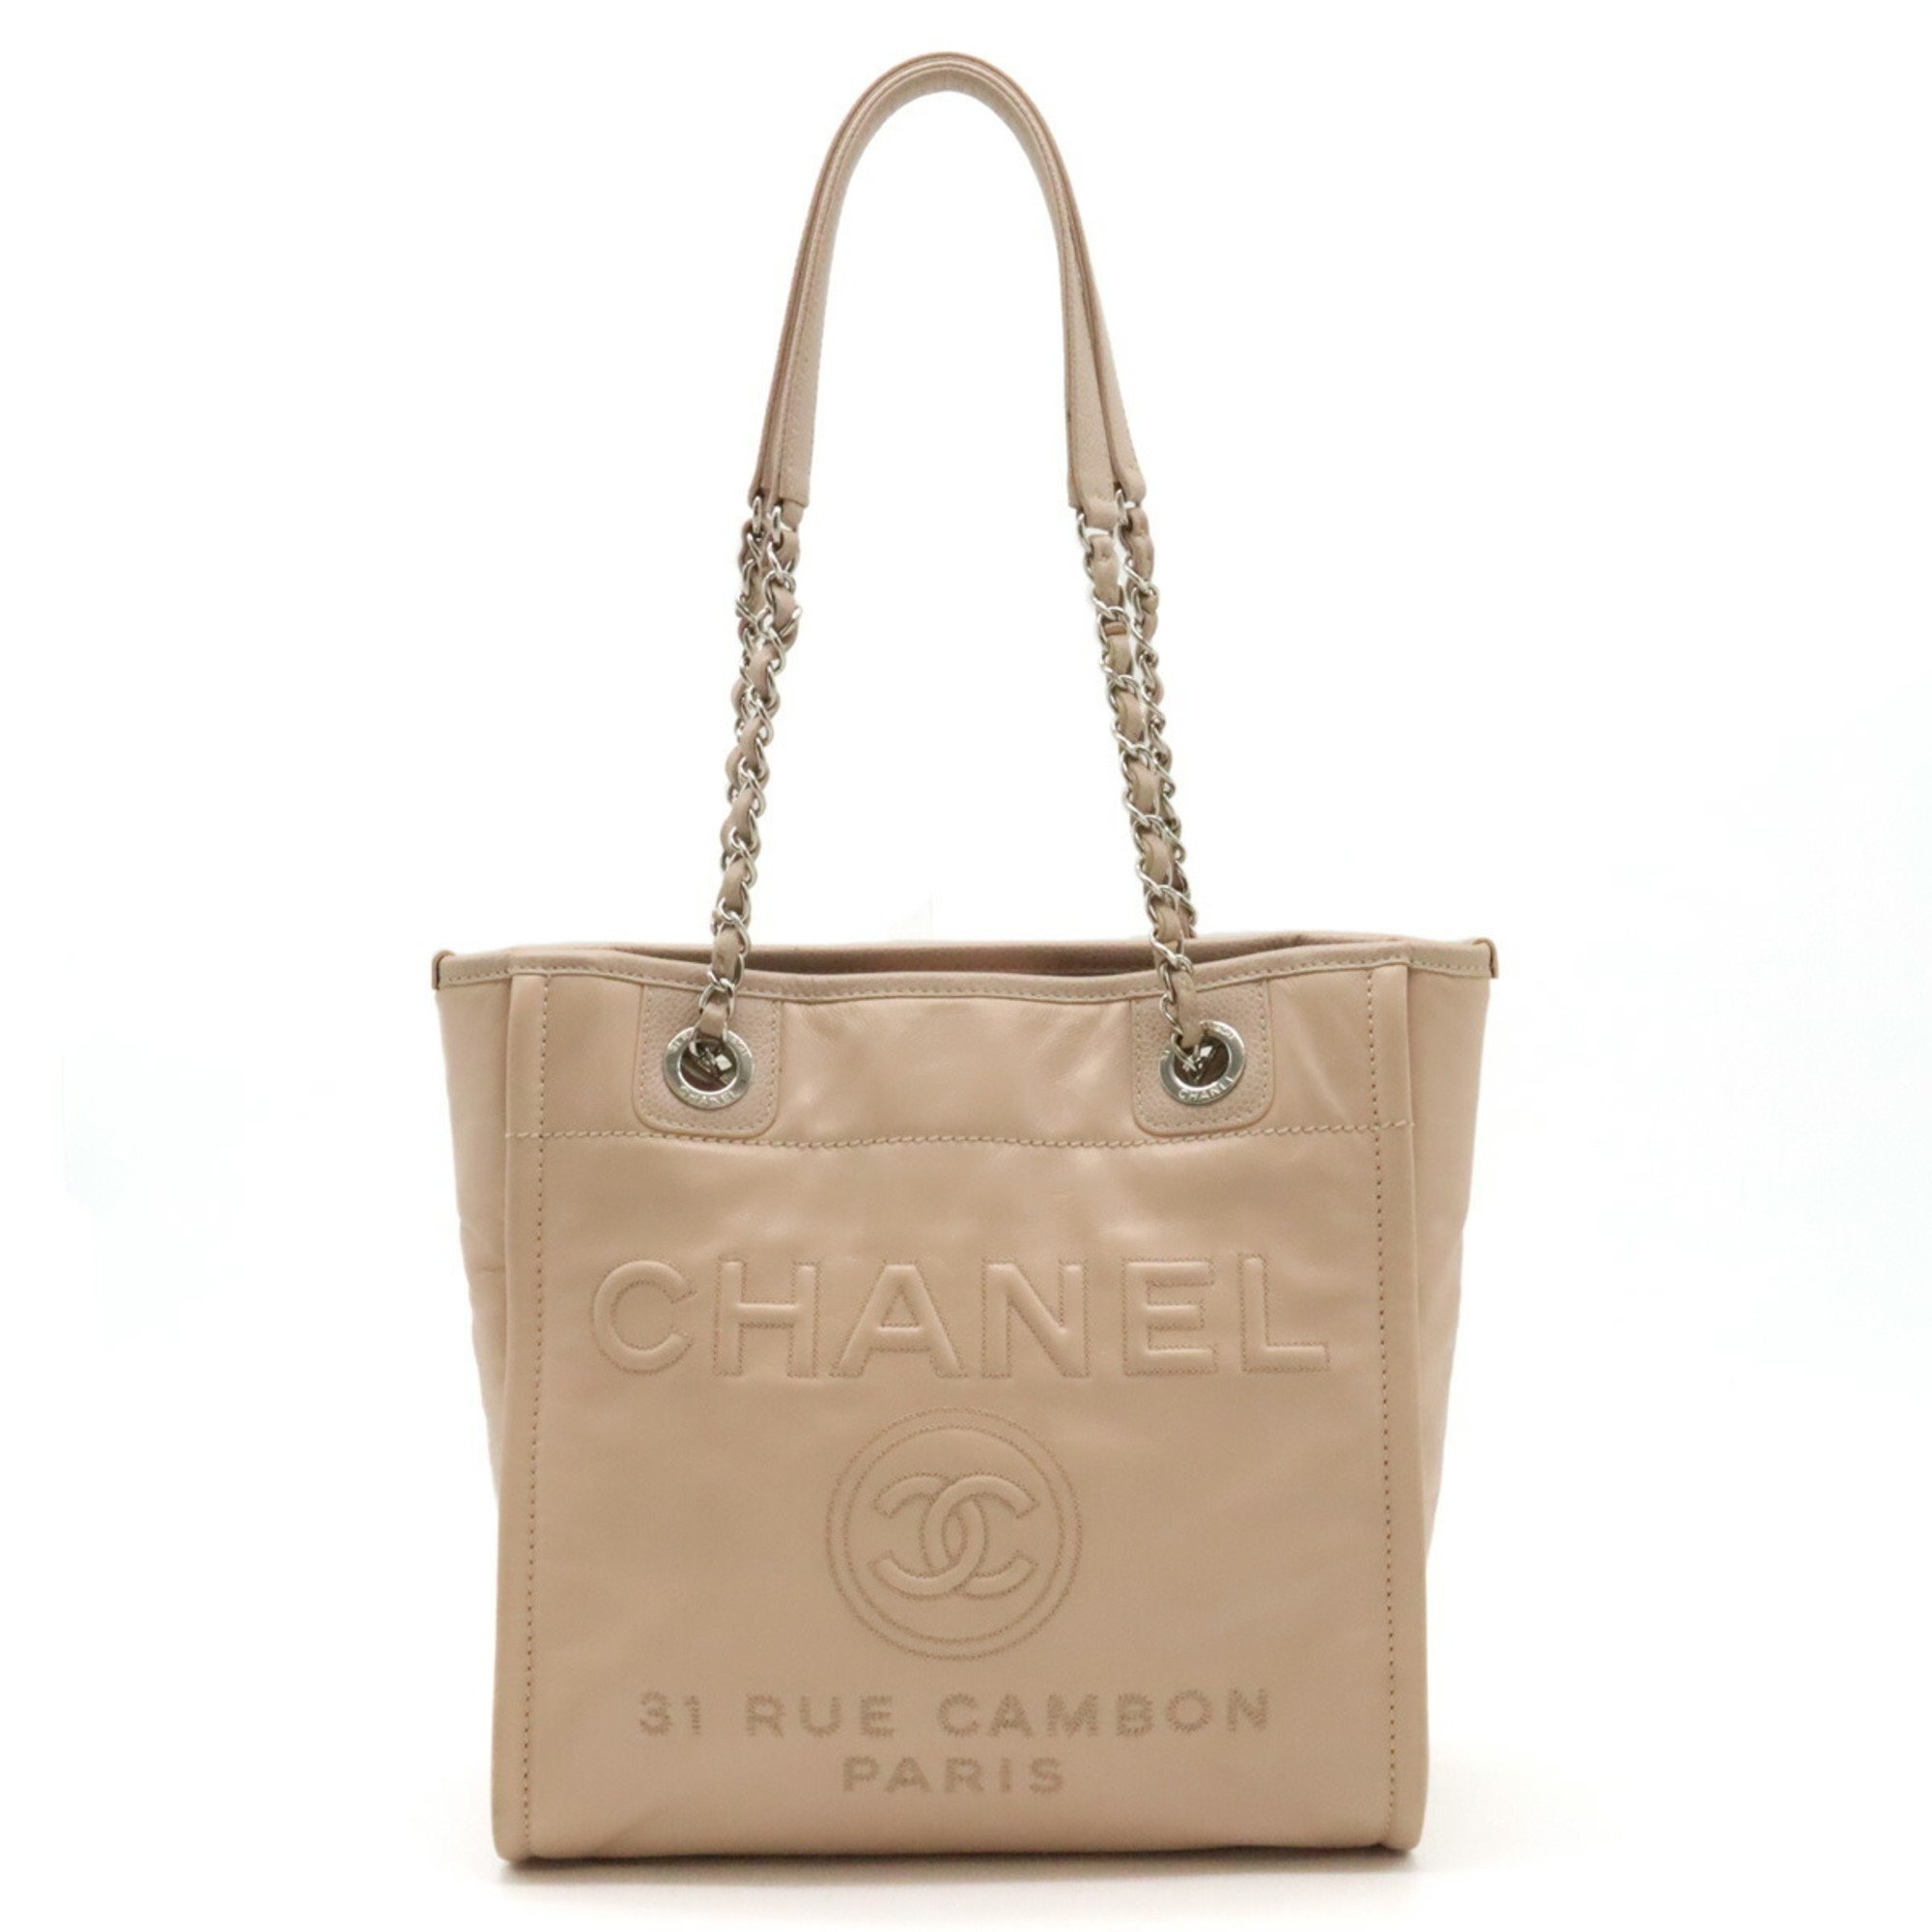 CHANEL Deauville Chain Shoulder Tote Bag Calf Leather Pink Beige A93256